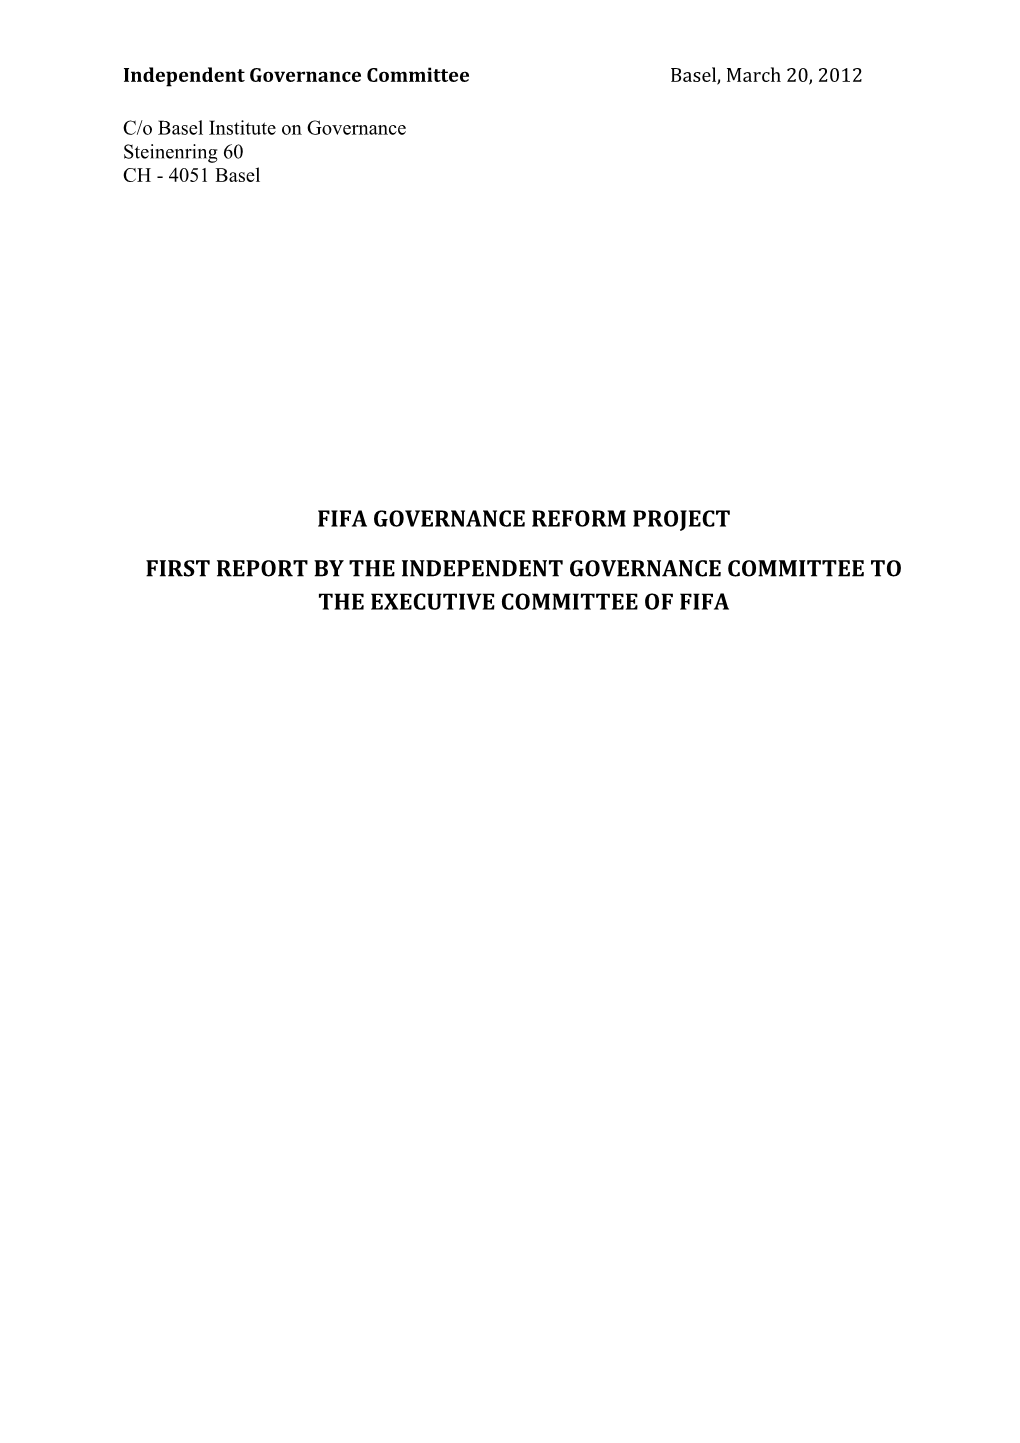 First Report of the Independent Governance Committee to FIFA's